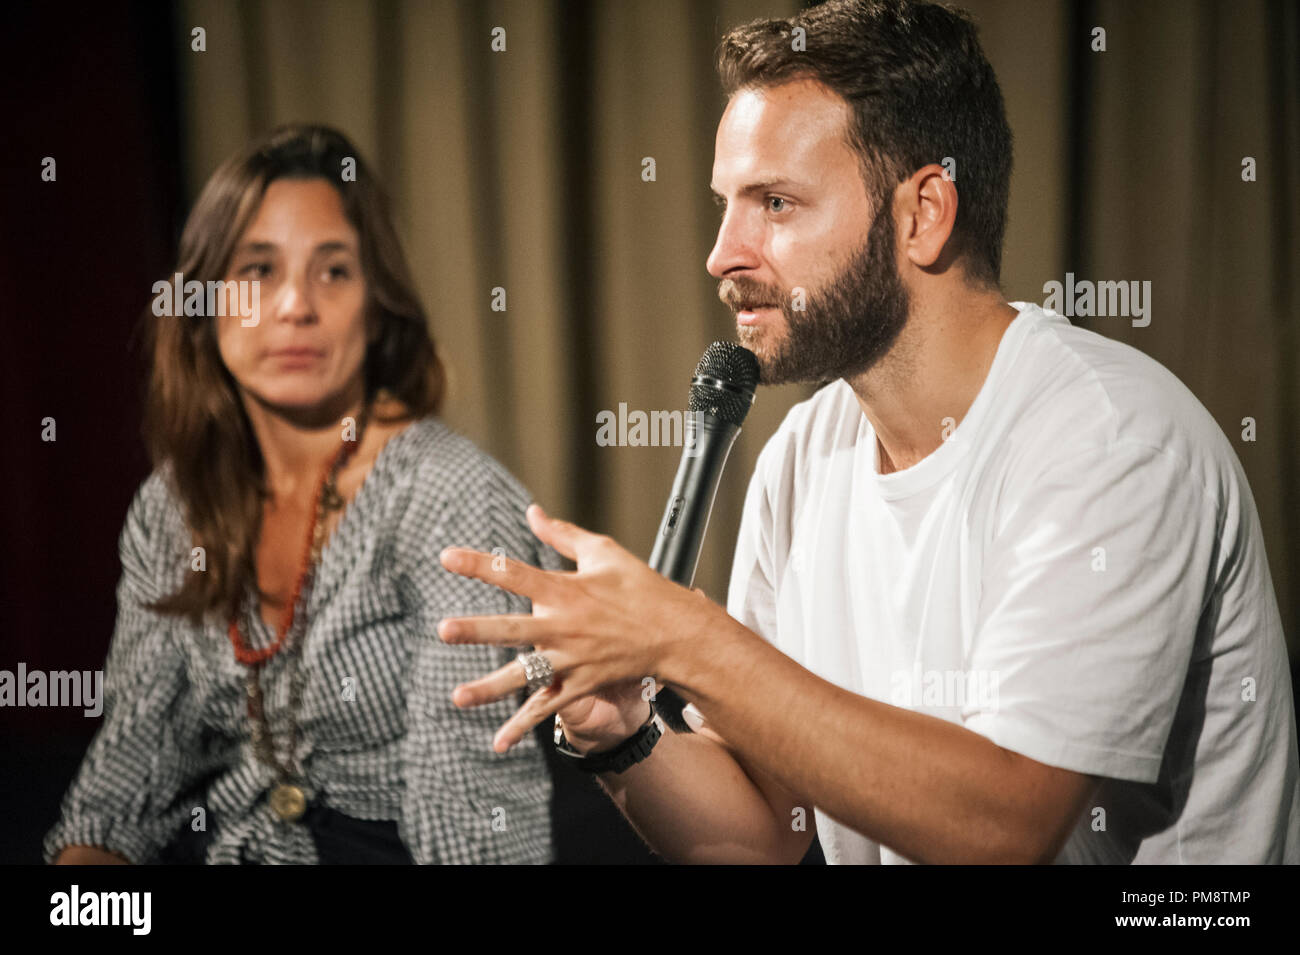 Actor Alessandro Borghi seen speaking to the audience during the  presentation of the movie, On My Skin (Sulla Mia Pelle) in Milan. Shown at  at the 75thVenice International Film Festival, the movie